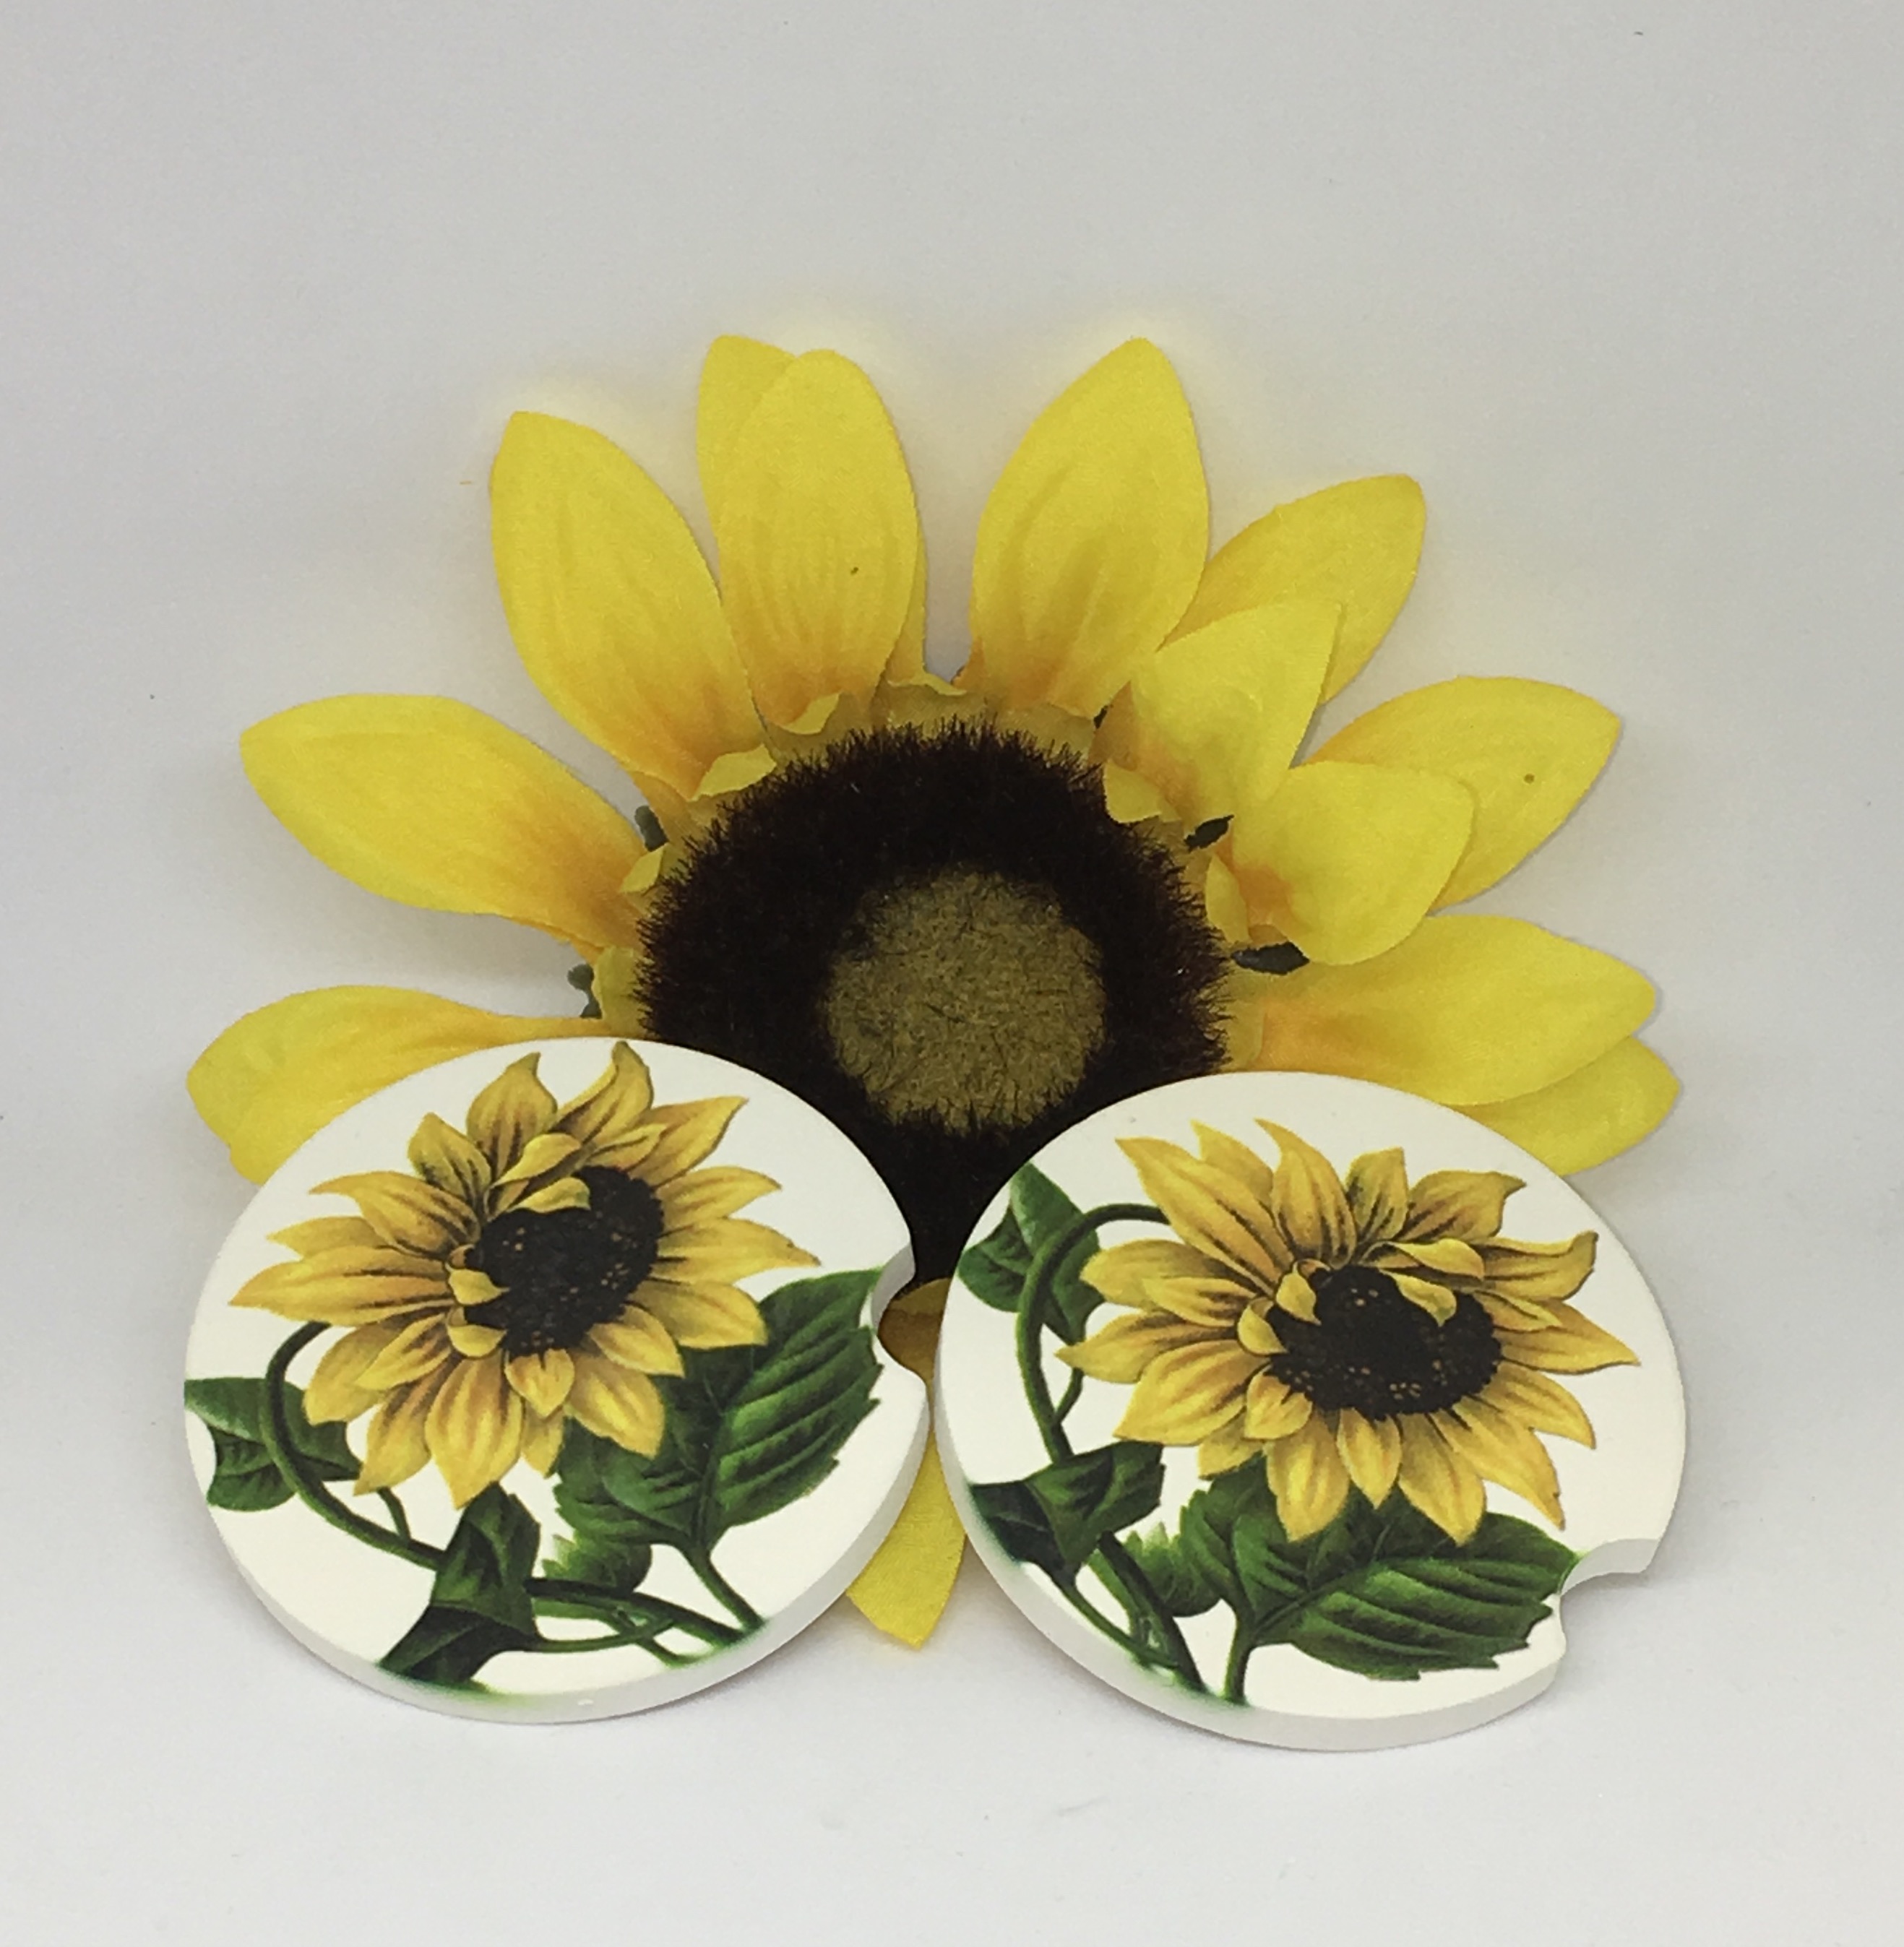 Sunflower car coasters made with sublimation printing